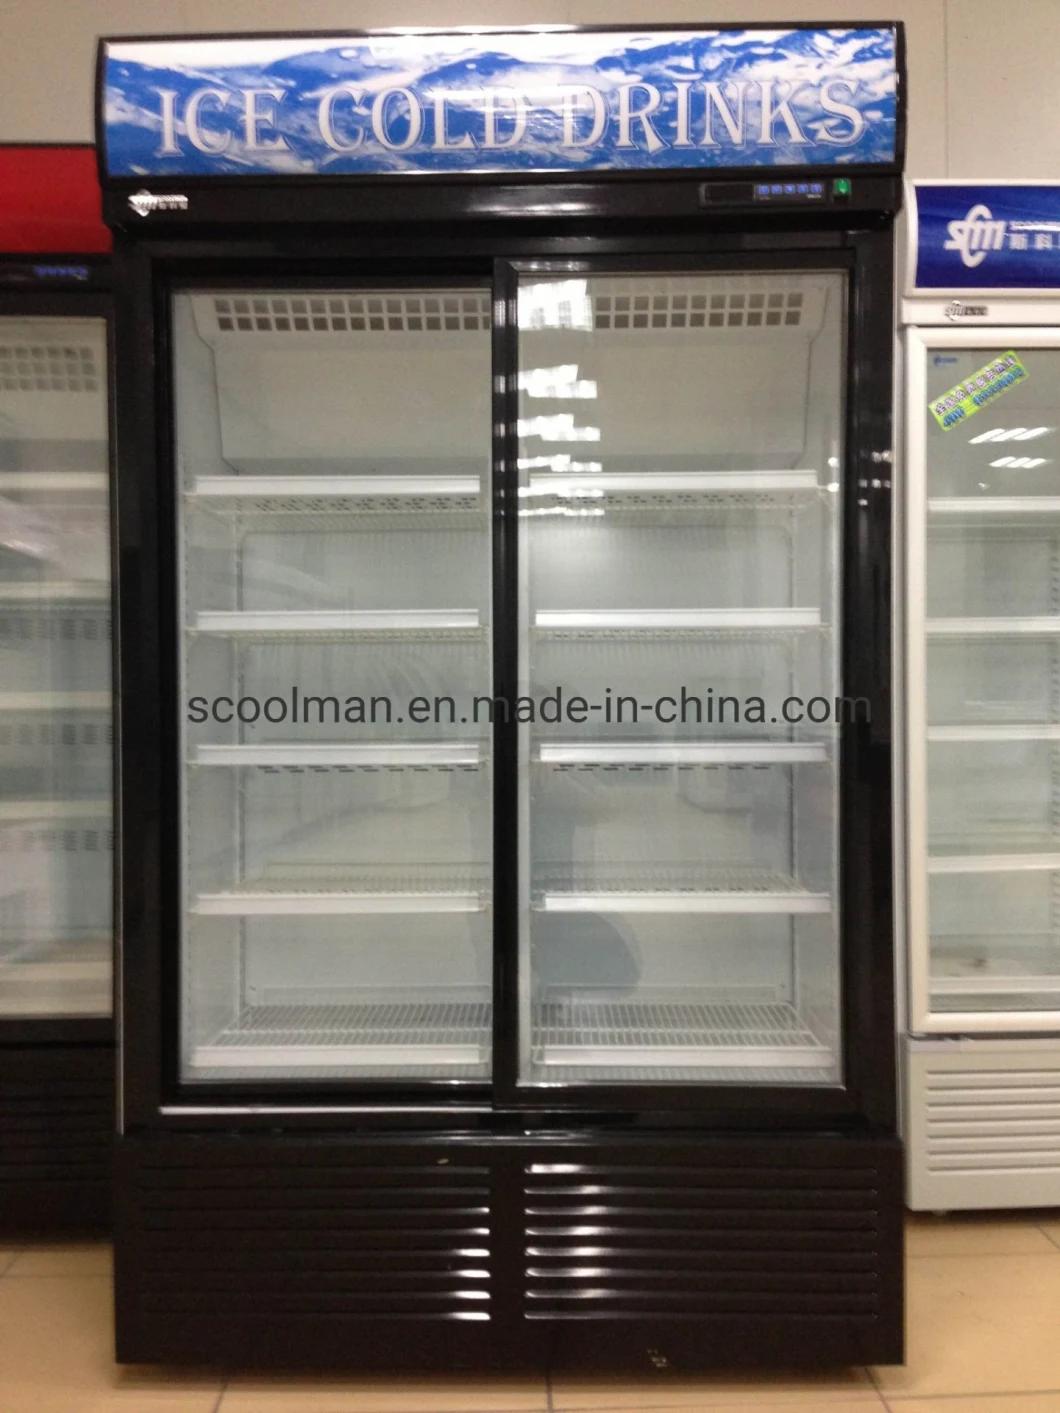 High Quality Commercial Refrigerator Upright Freezer with Glass Door Vertical Showcase Freezer